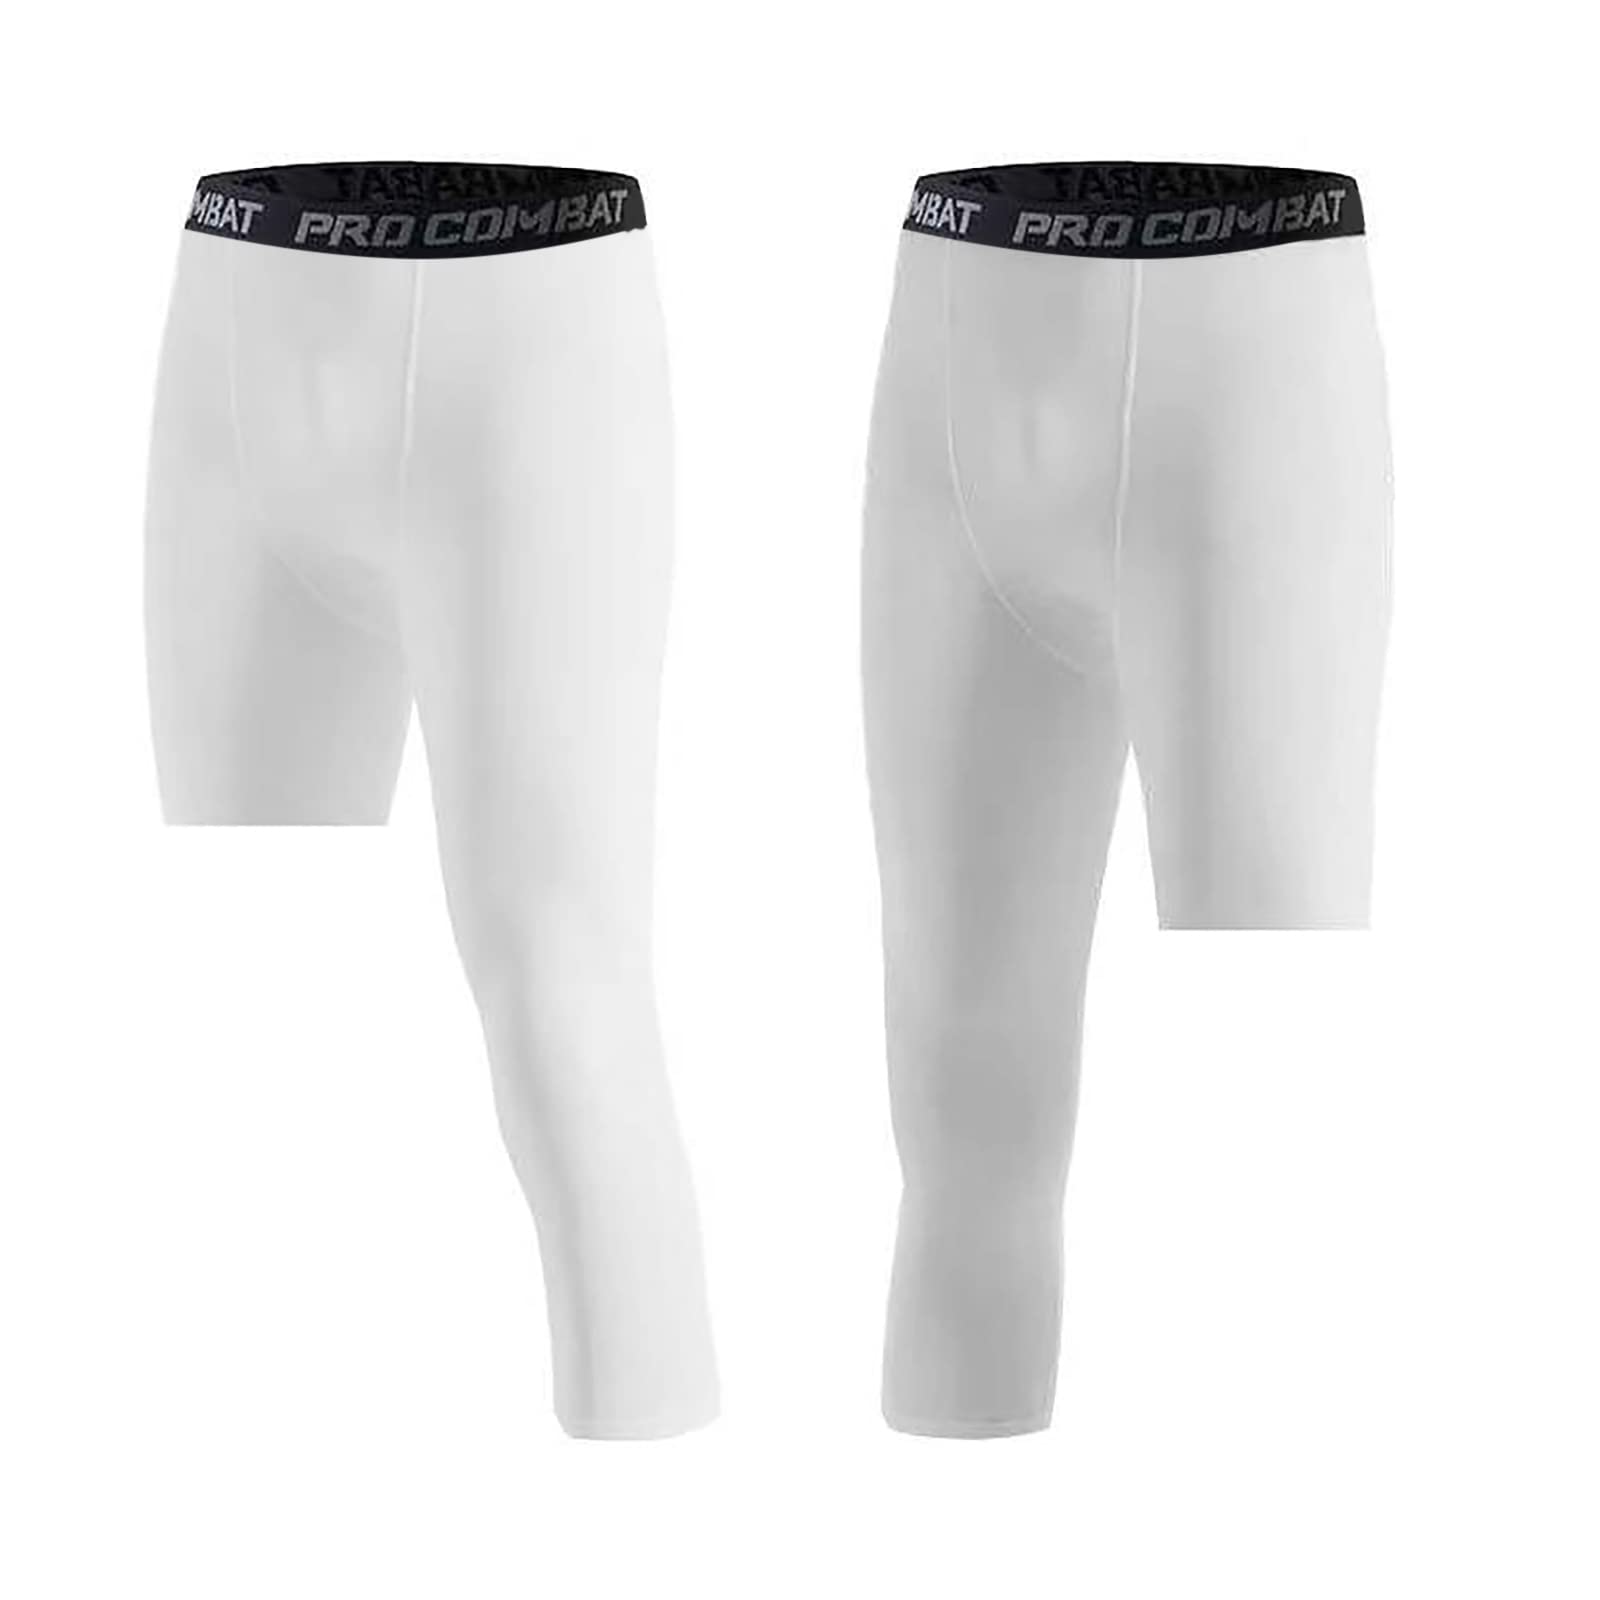  Boys 3/4 Compression Pants Leggings Tights For Sports Youth  Kids Athletic Basketball Base Layer White XS